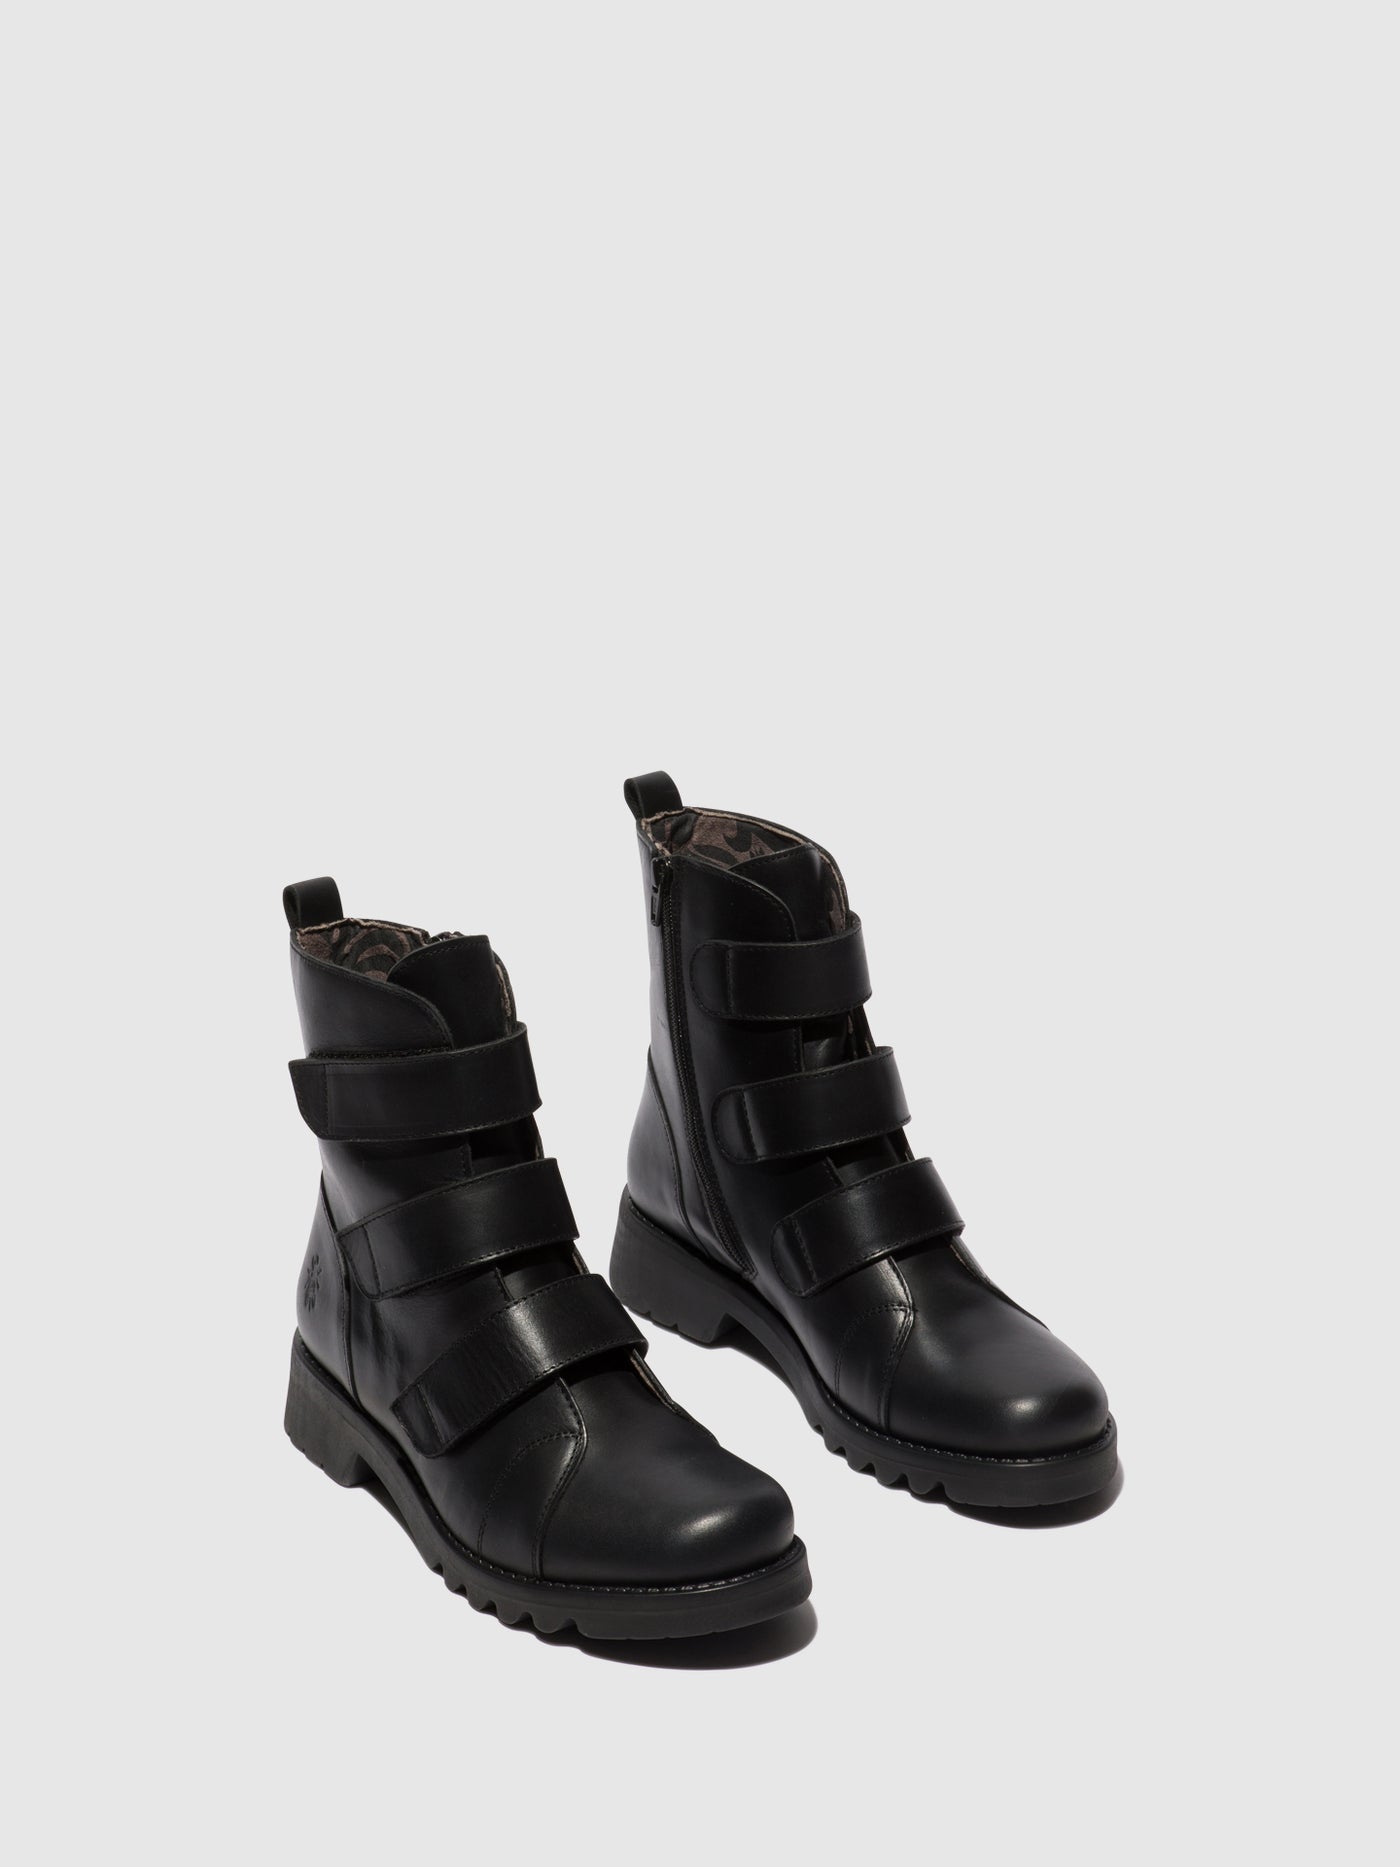 Velcro Ankle Boots RACH790FLY BLACK (ALL BLACK)